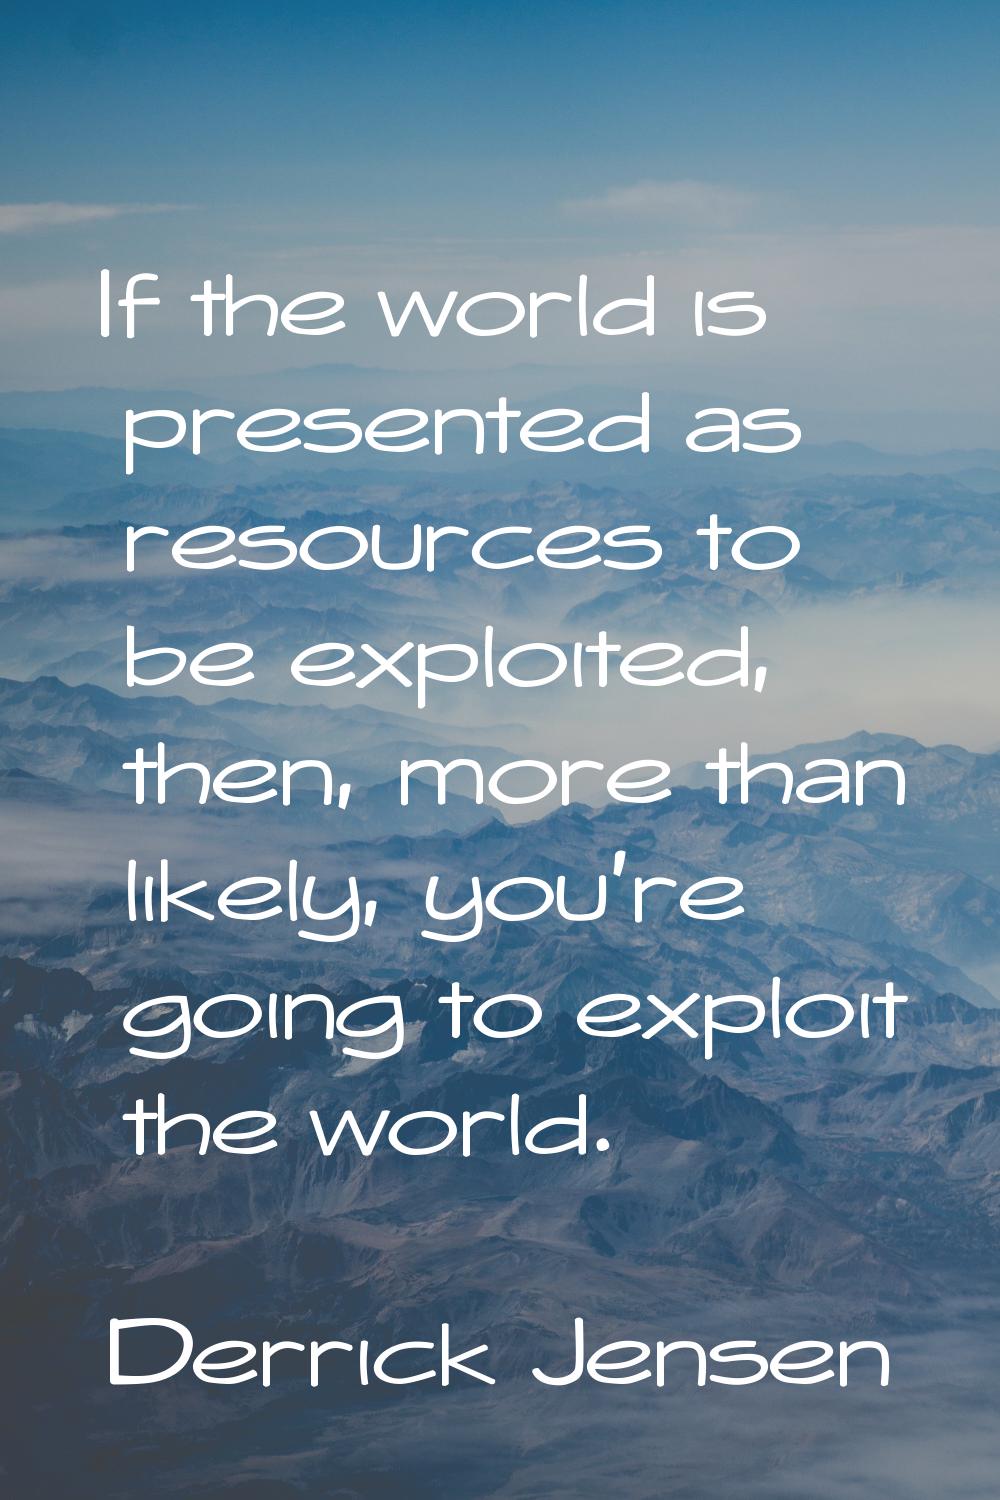 If the world is presented as resources to be exploited, then, more than likely, you're going to exp